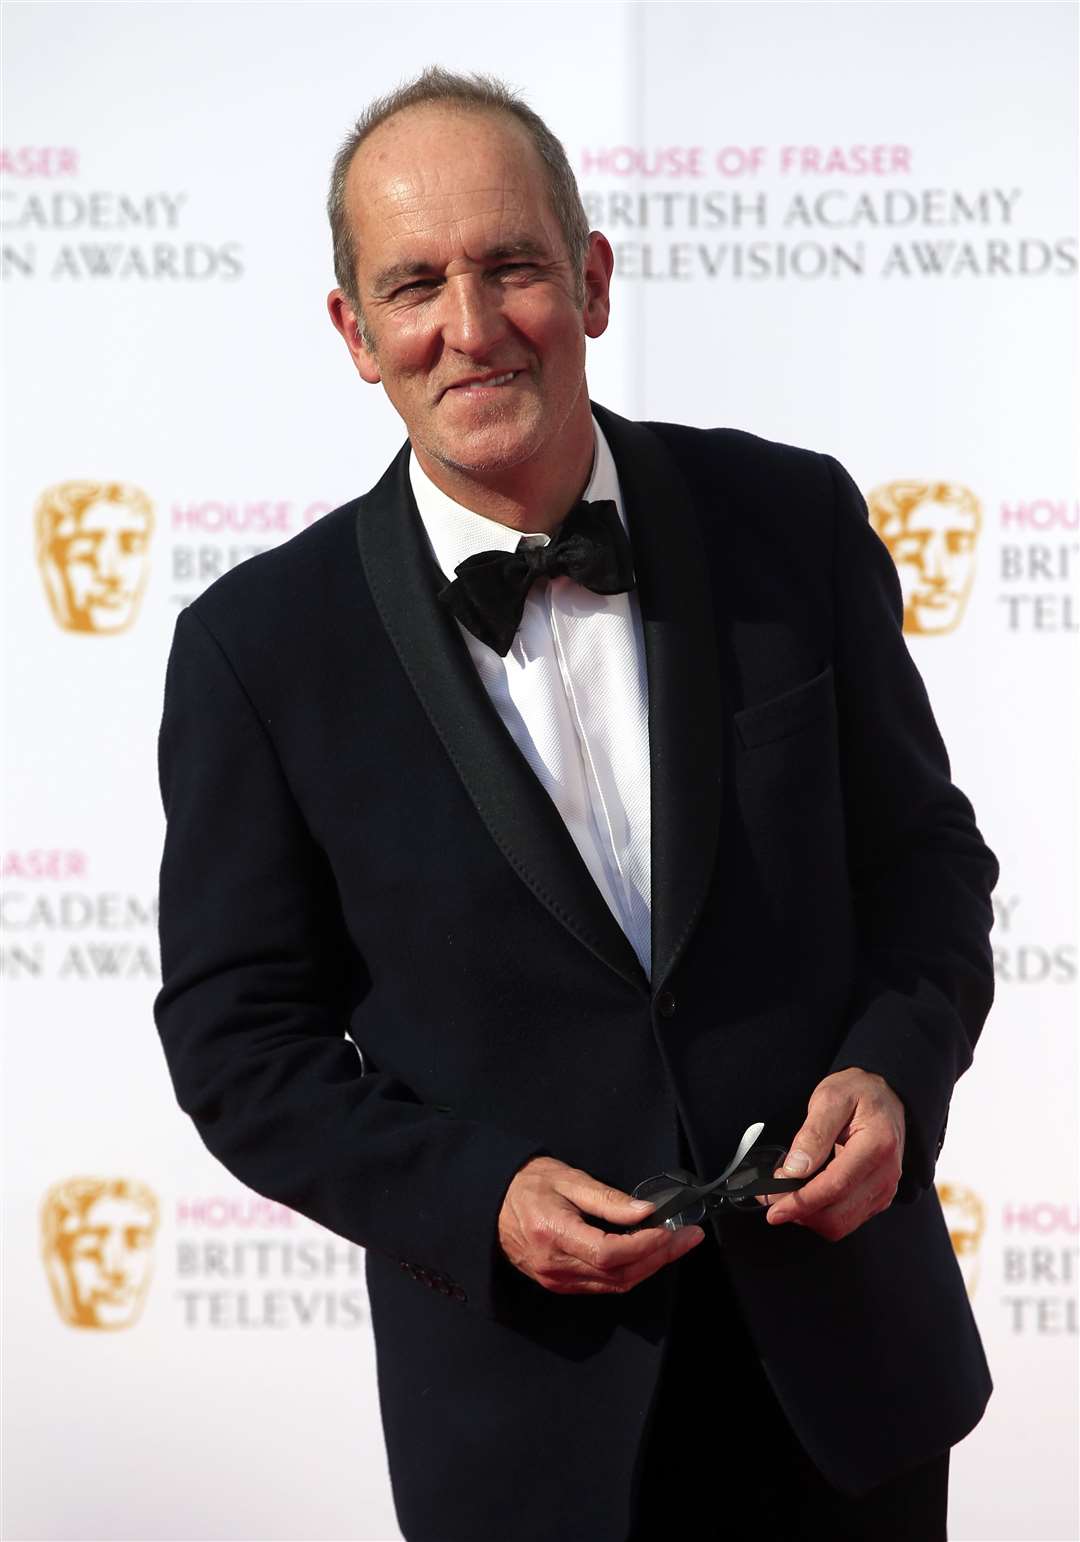 Grand Designs presenter Kevin McCloud said the UK was not building enough houses to meet demand (Jonathan Brady/PA)